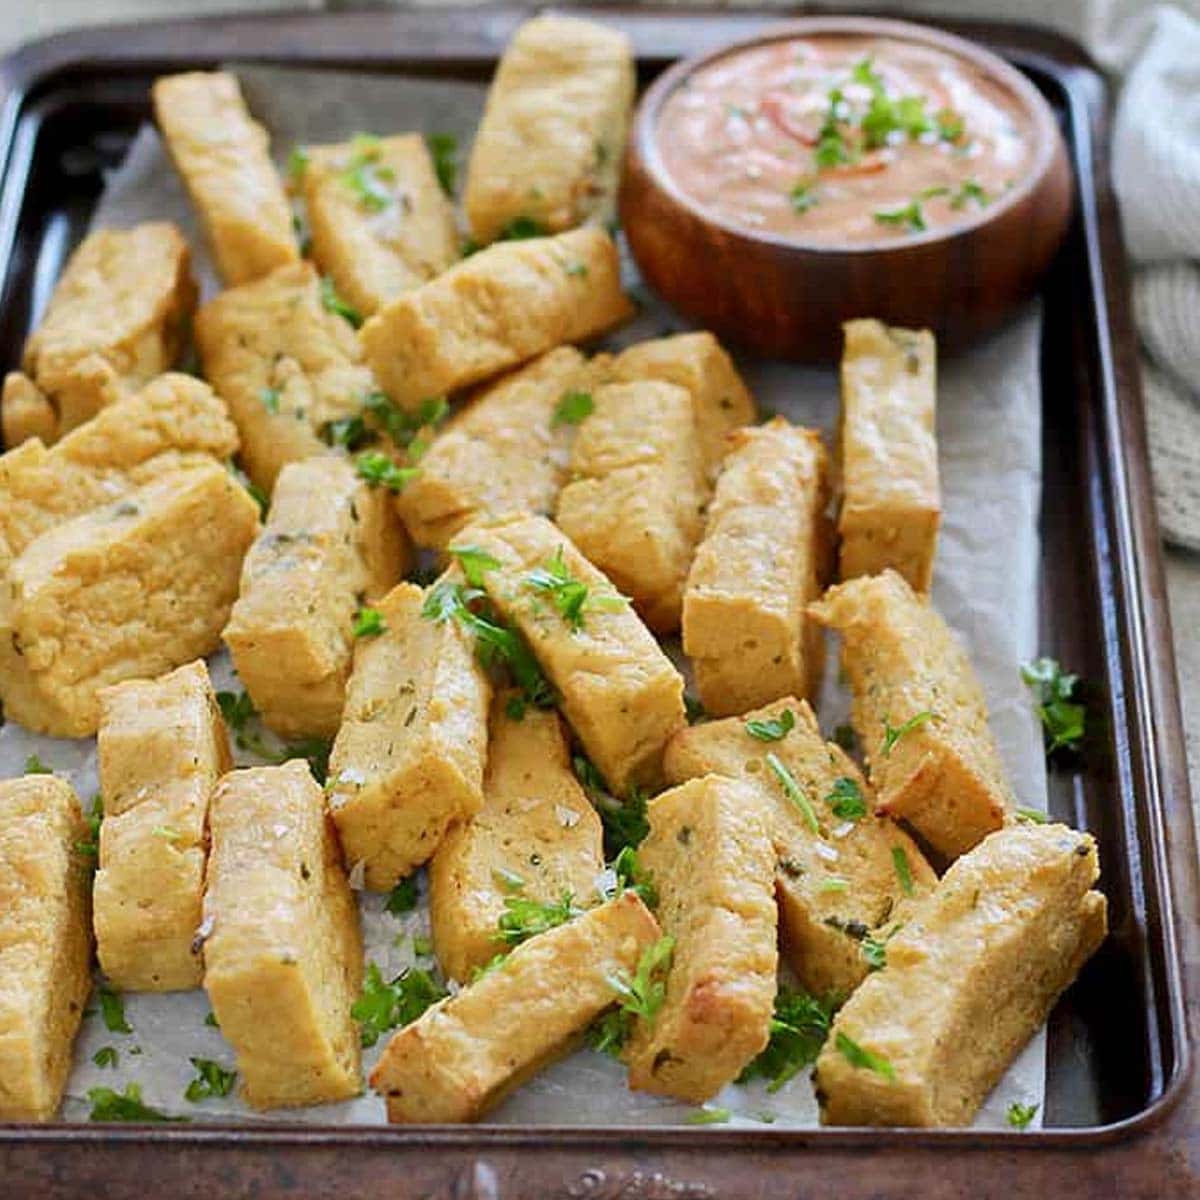 Chickpea fries on a baking sheet scattered with fresh herbs